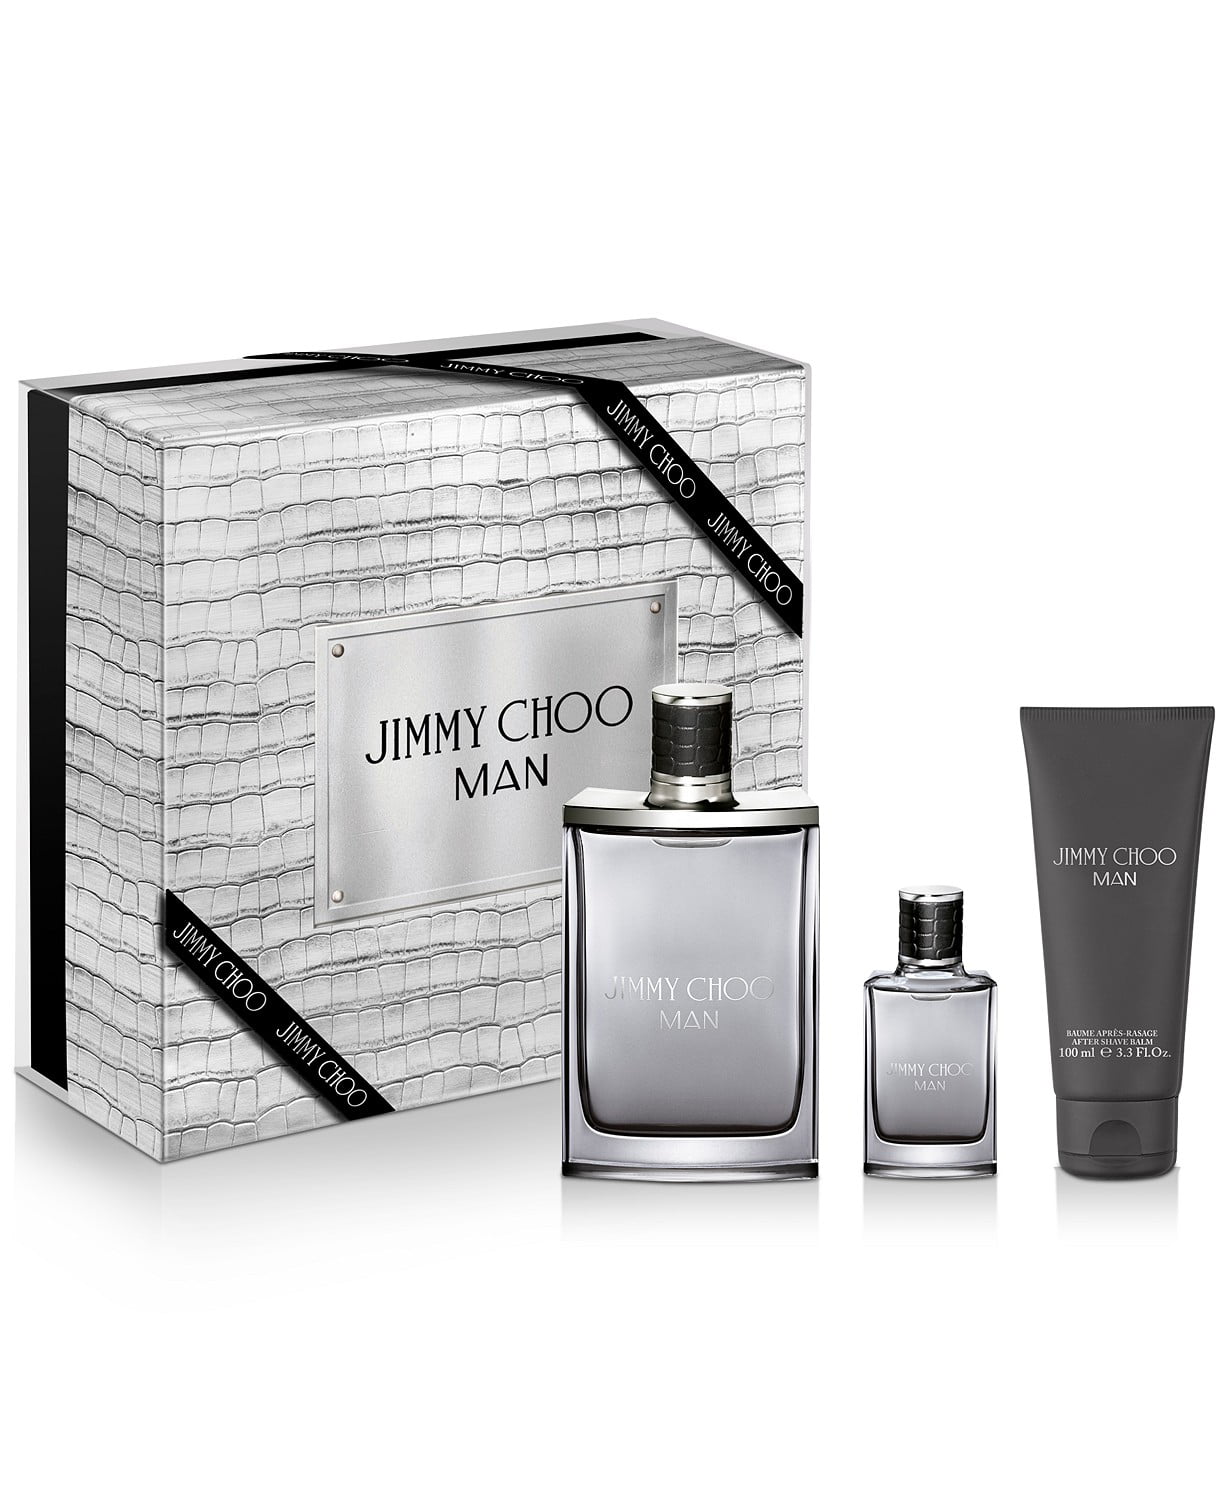 Jimmy Choo - Jimmy Choo Man Cologne Gift Set for Men, 3 Pieces